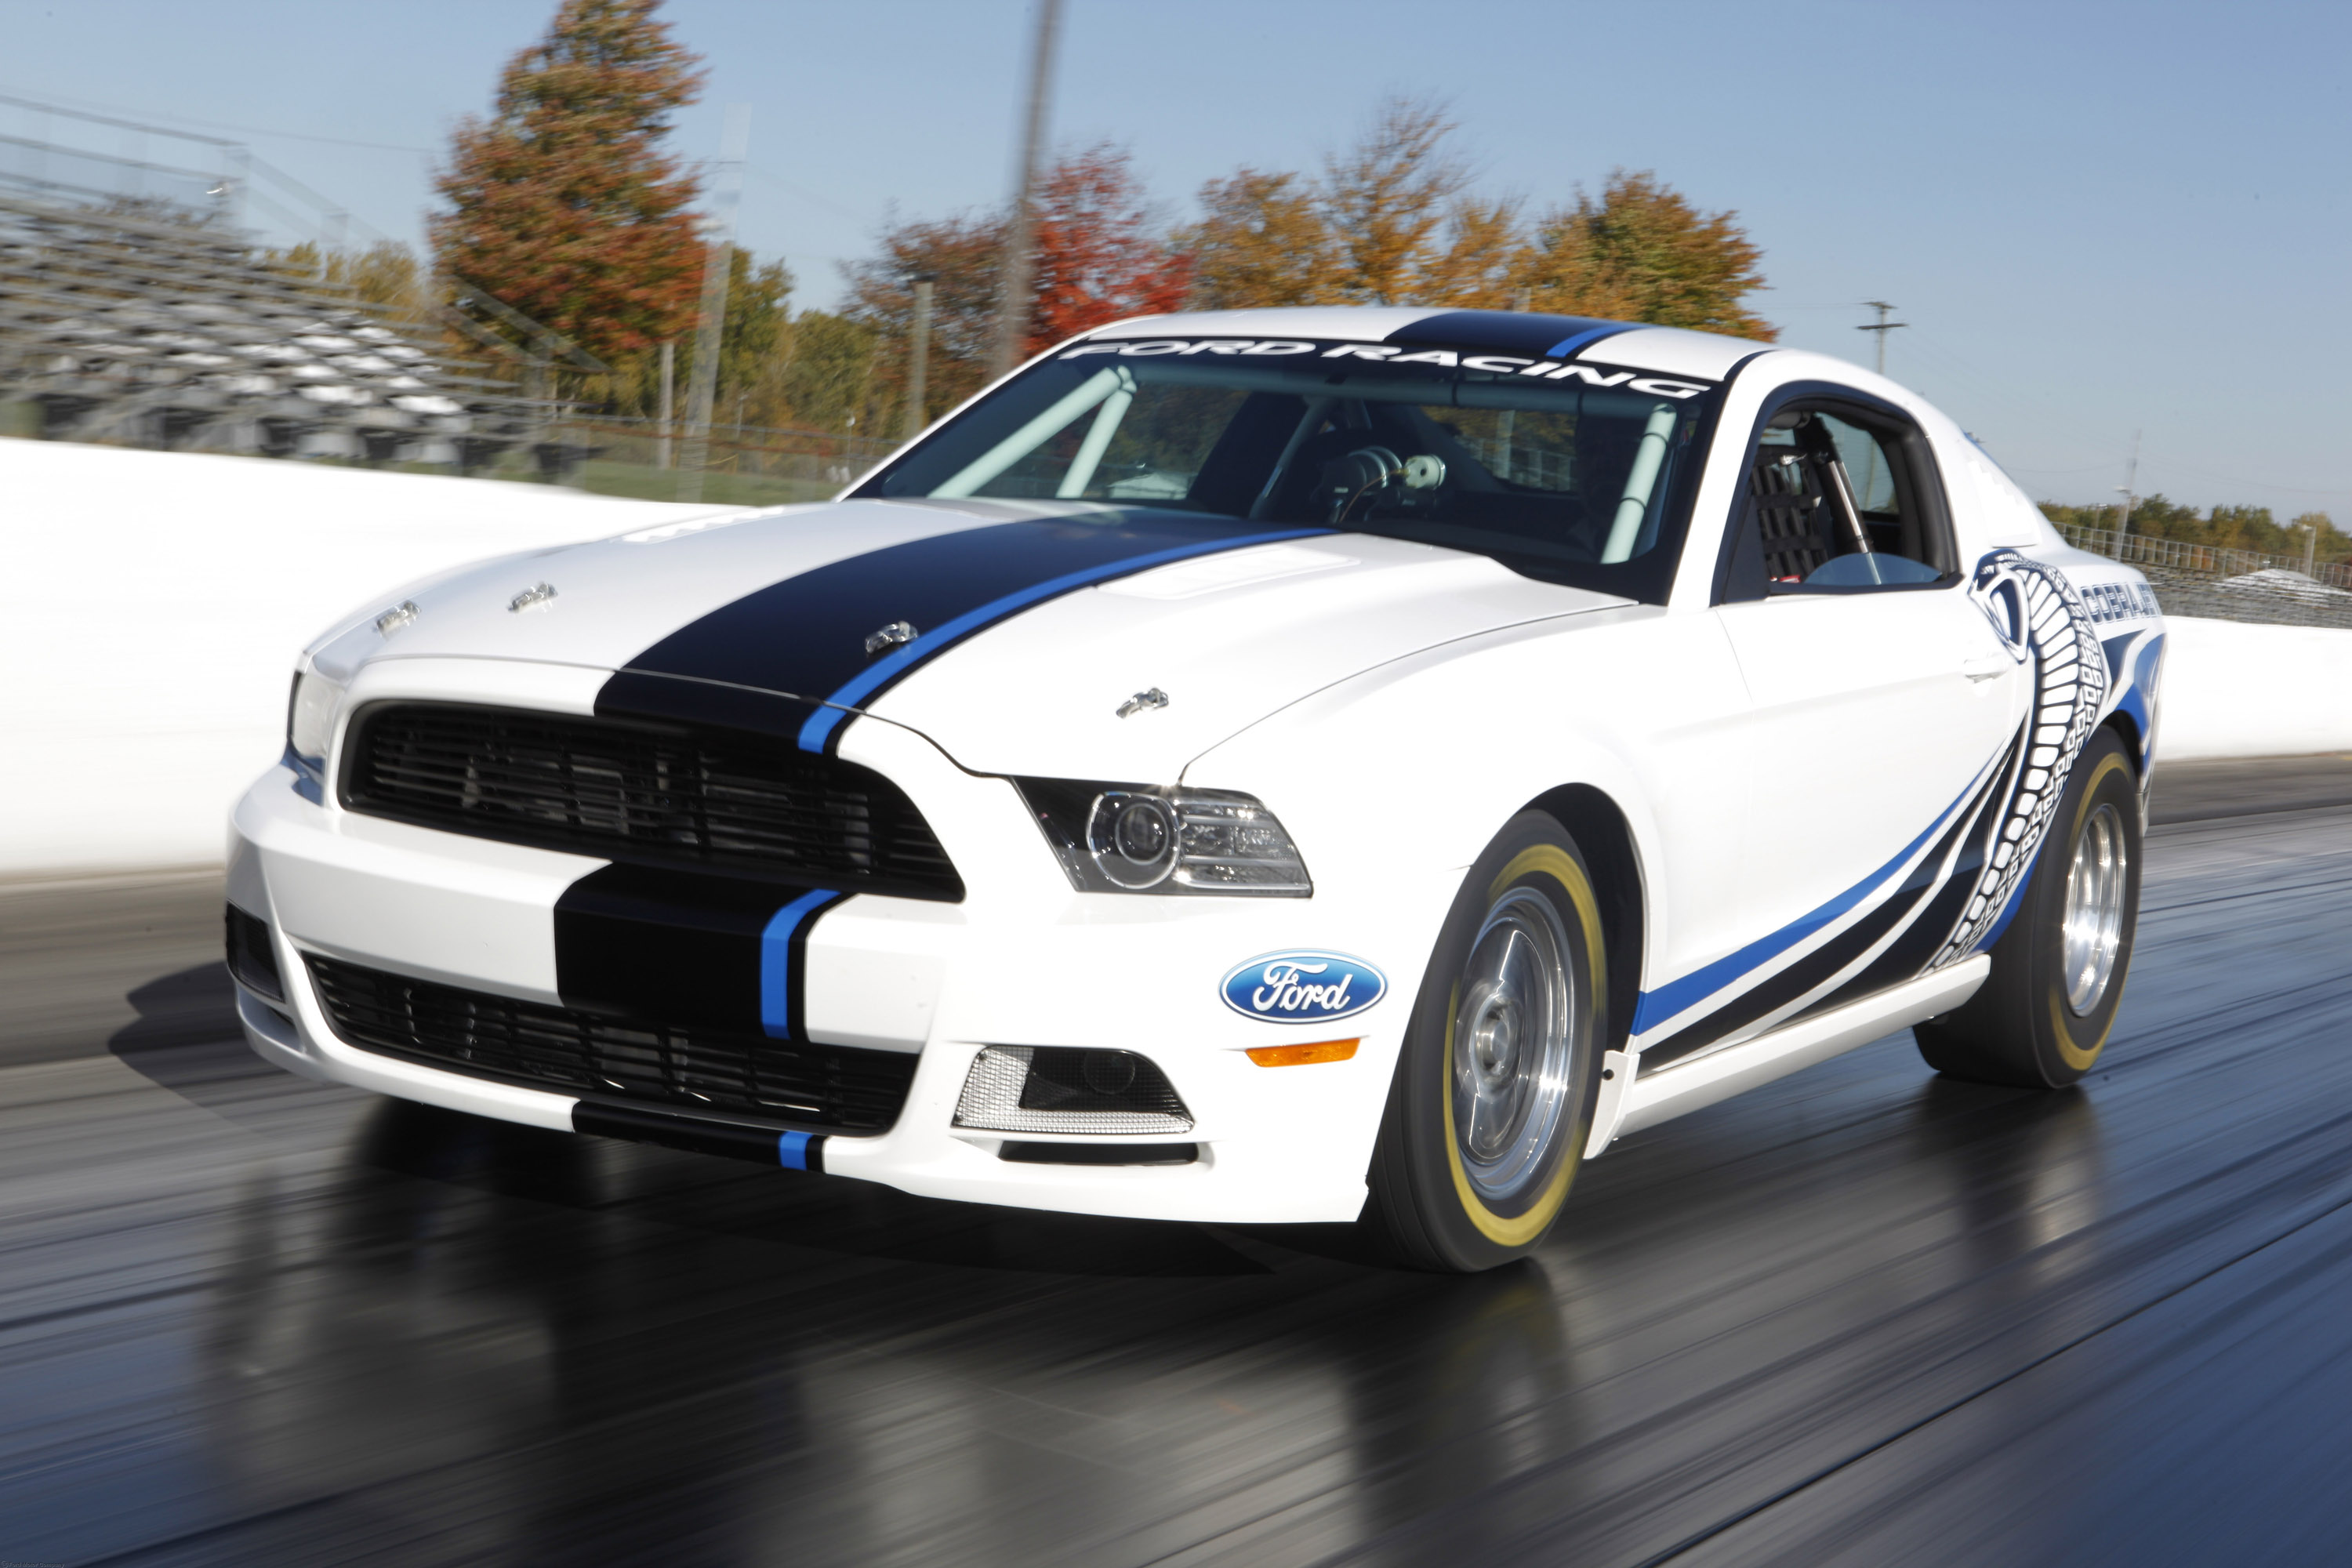 2013, Ford, Mustang, Cobra, Jet, Twin turbo, Concept, Race, Racing, Hot, Rod, Rods, Muscle Wallpaper